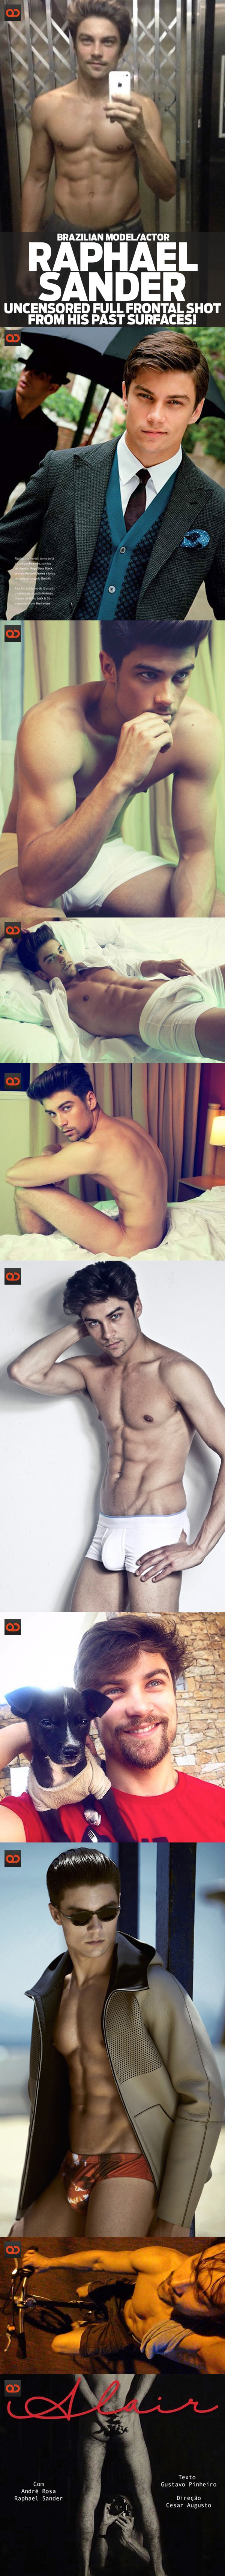 Raphael Sander, Brazilian Model/Actor, Uncensored Full Frontal Shot From His Past Surfaces!